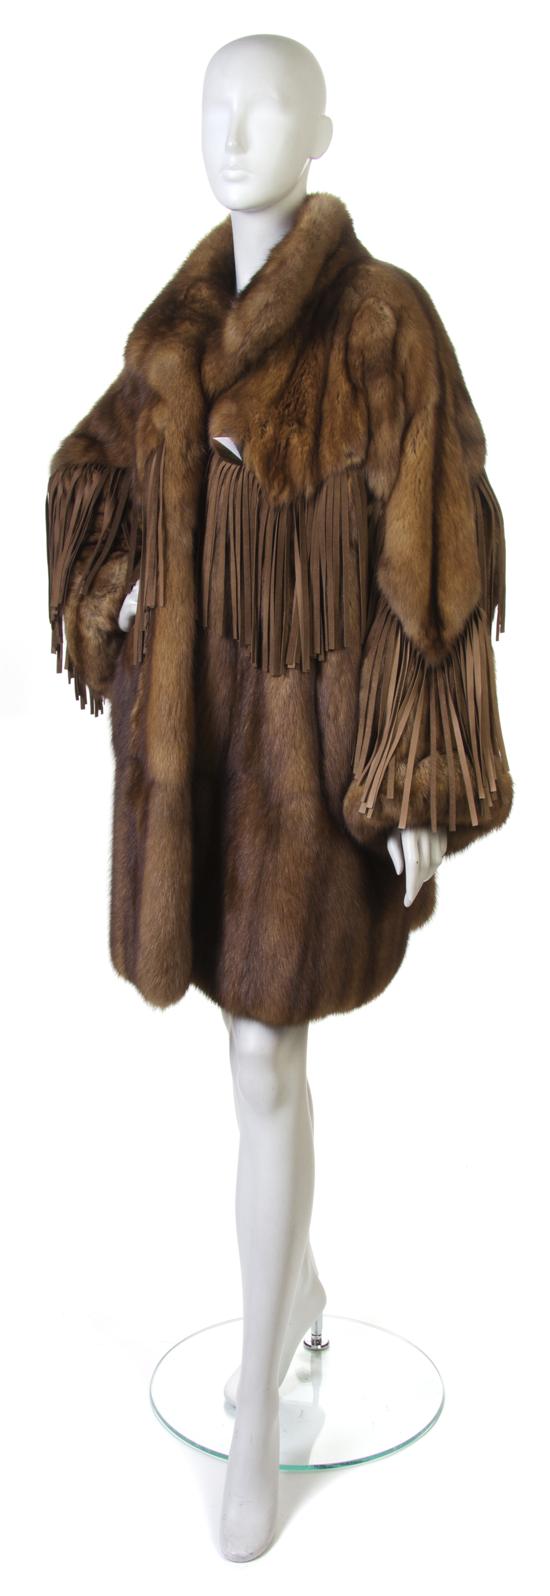 A Tan Sable Coat with fringe detail.